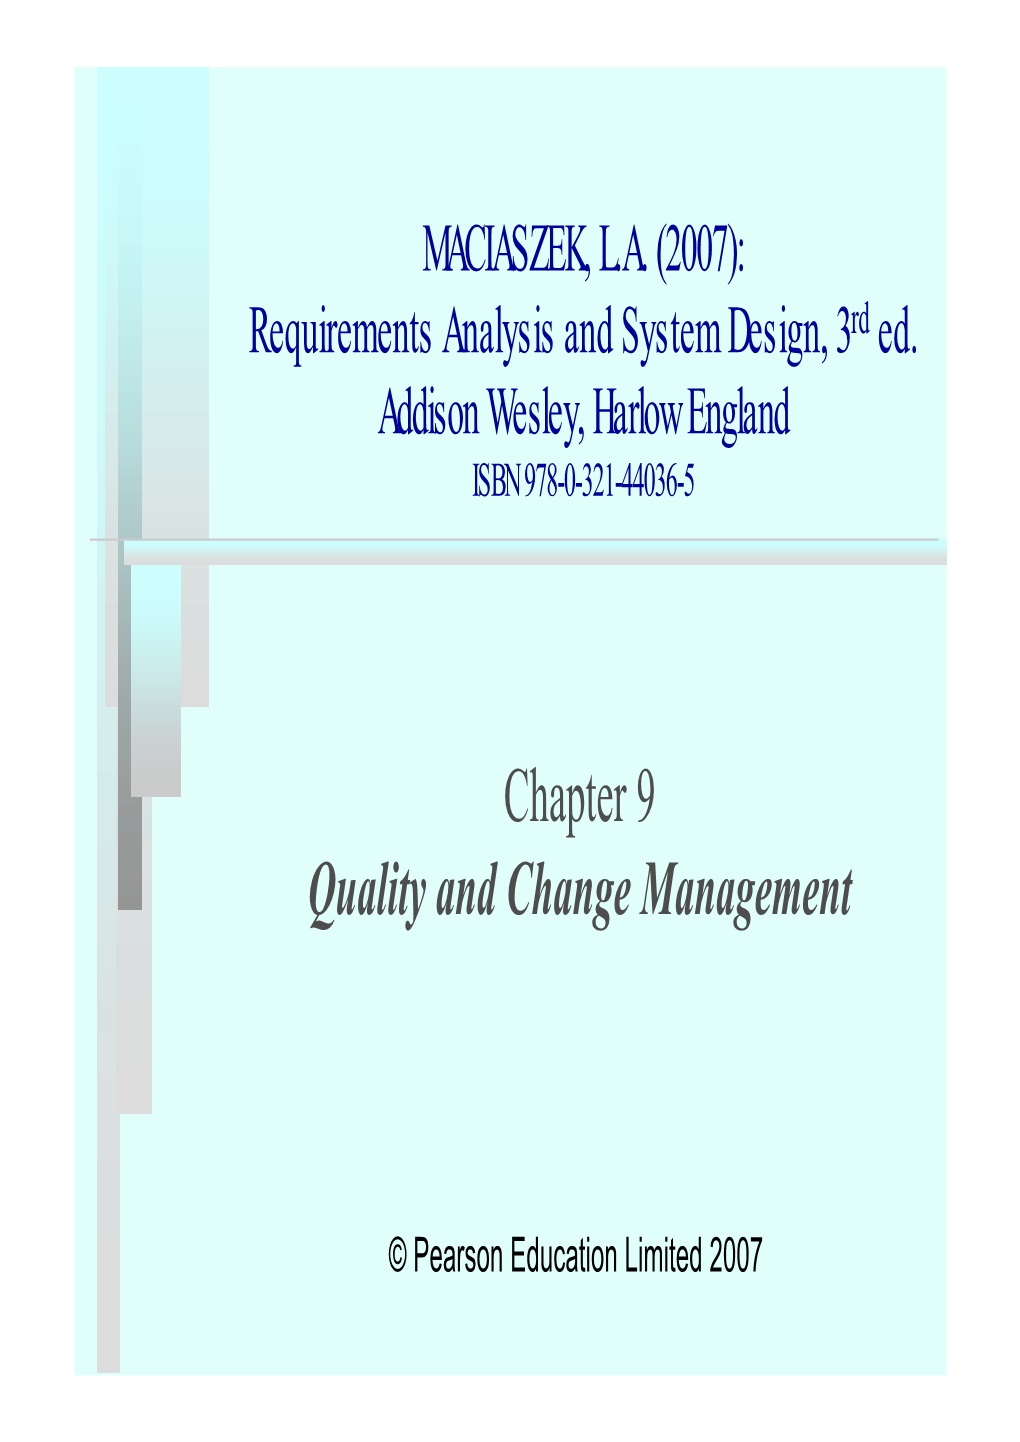 Chapter 9 Quality and Change Management